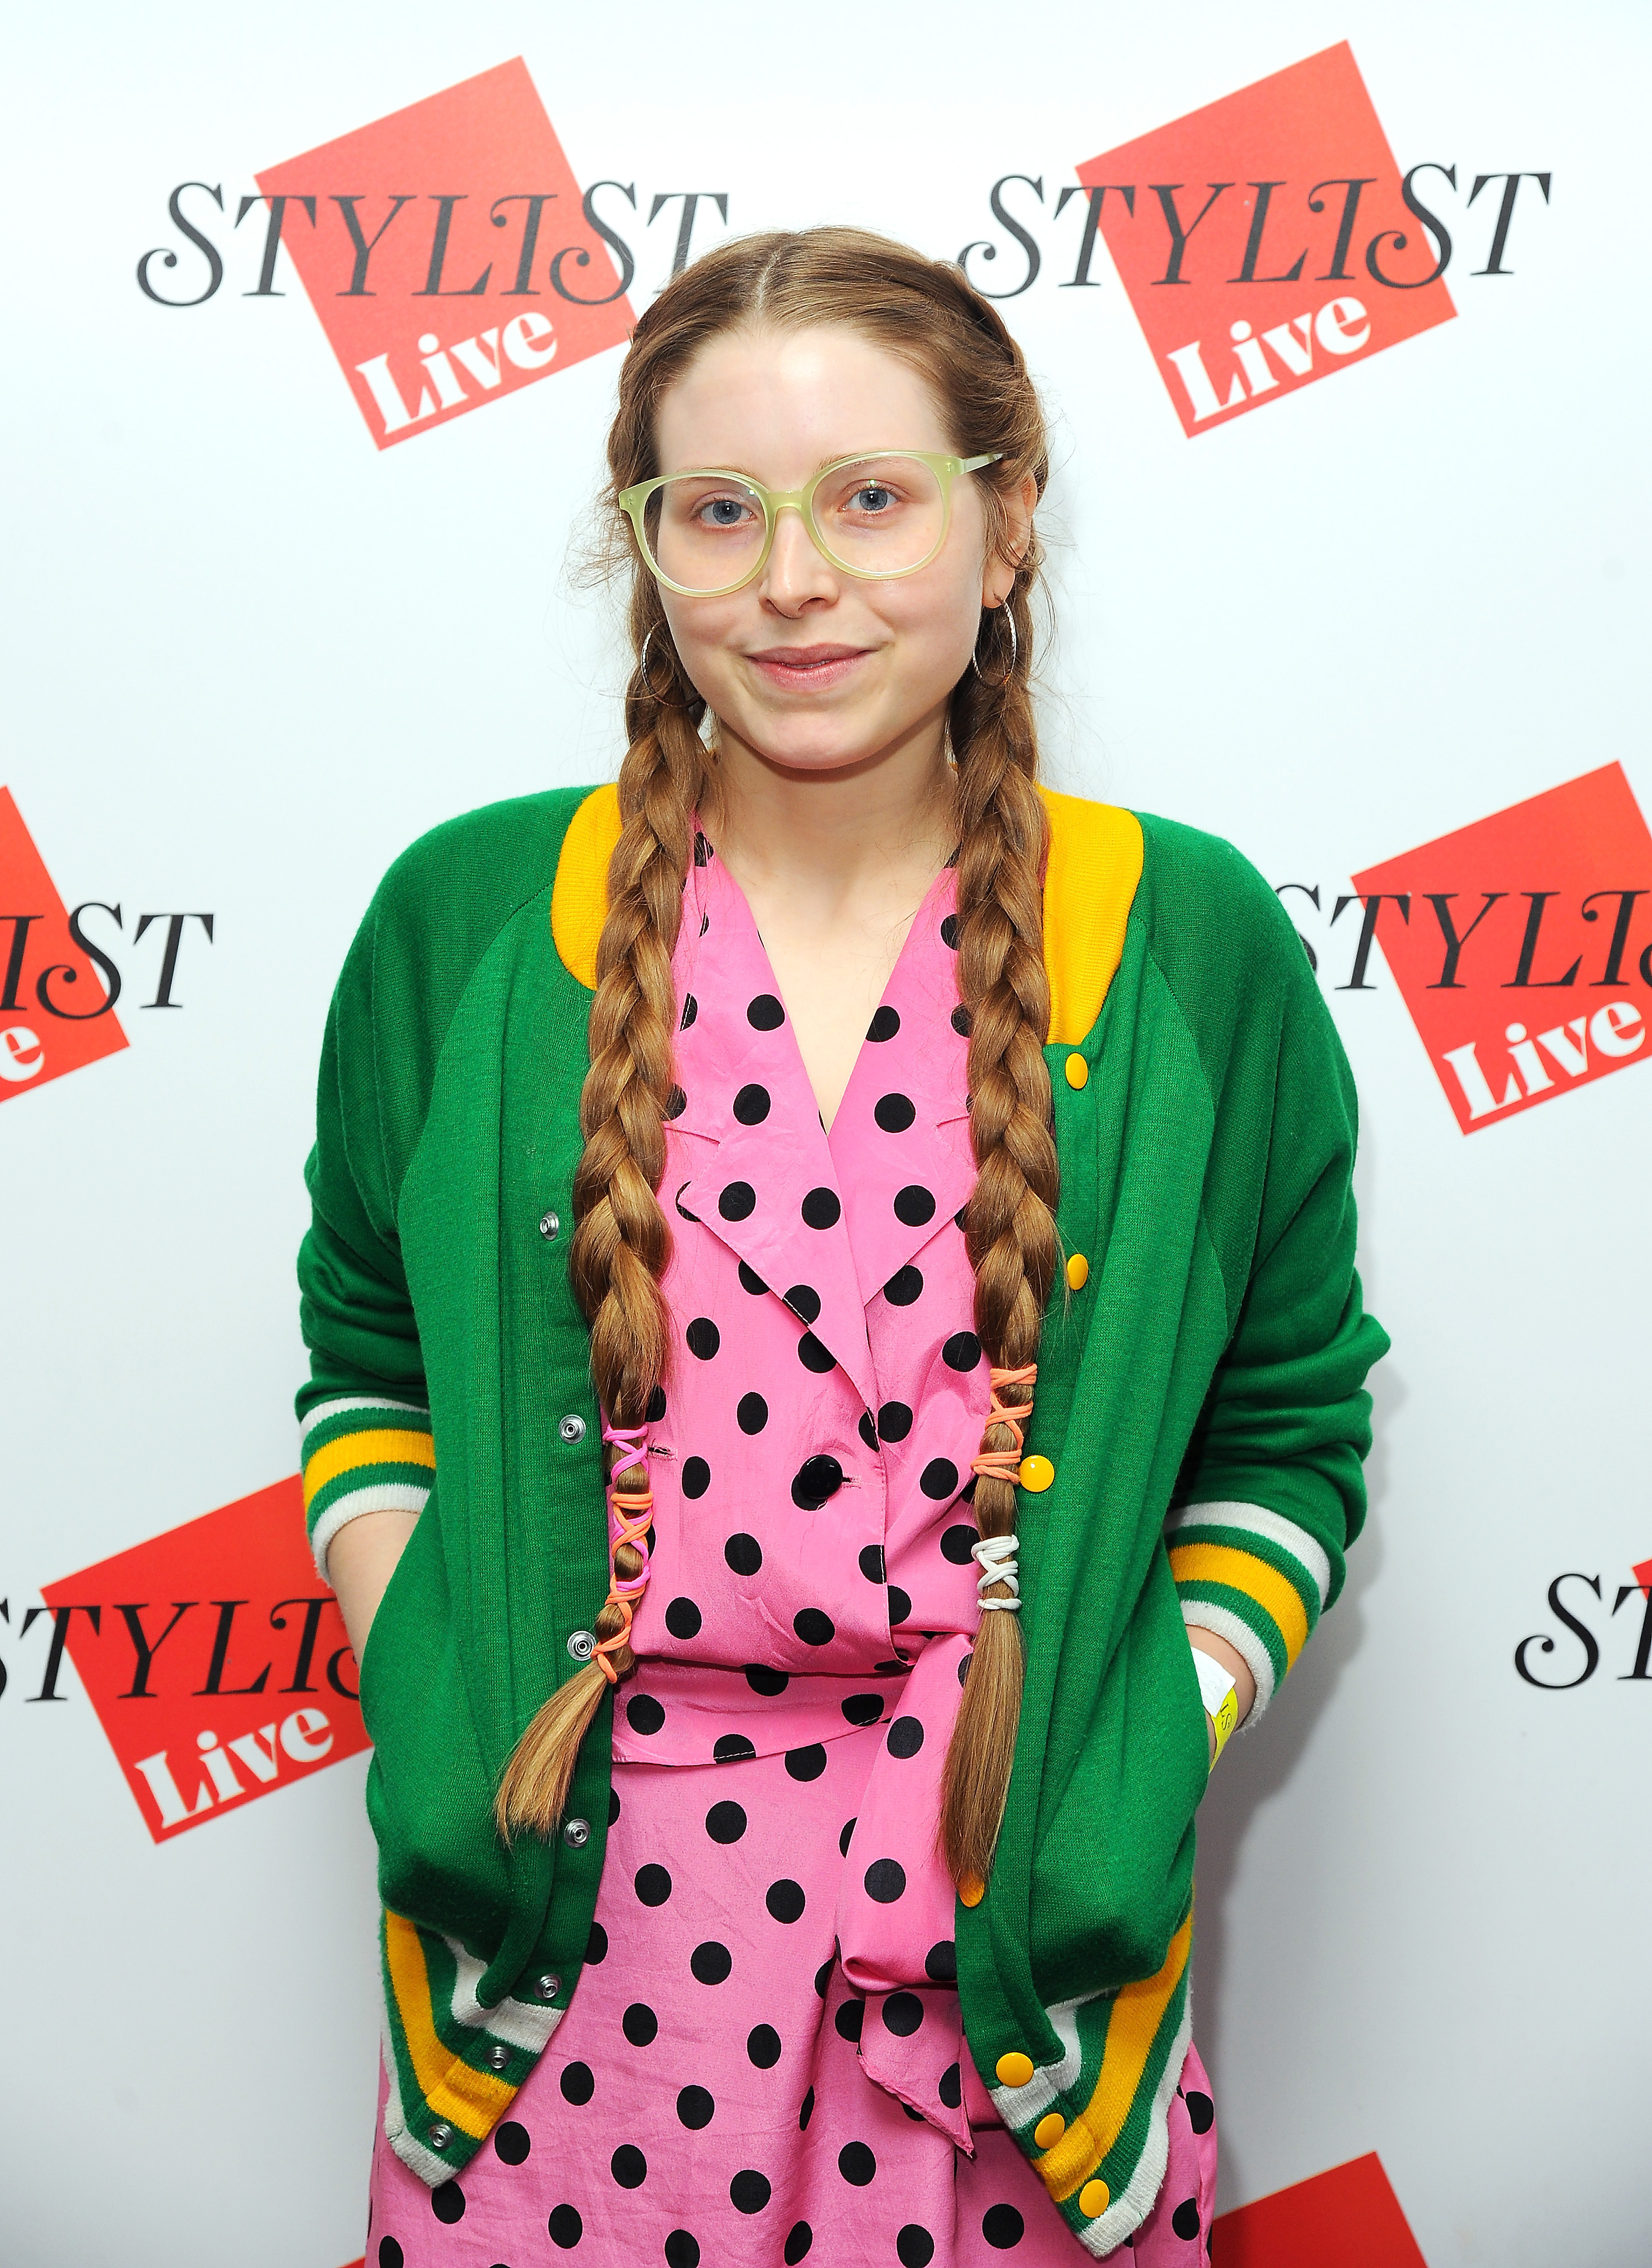 Harry Potter star Jessie Cave has slammed Miriam's comments